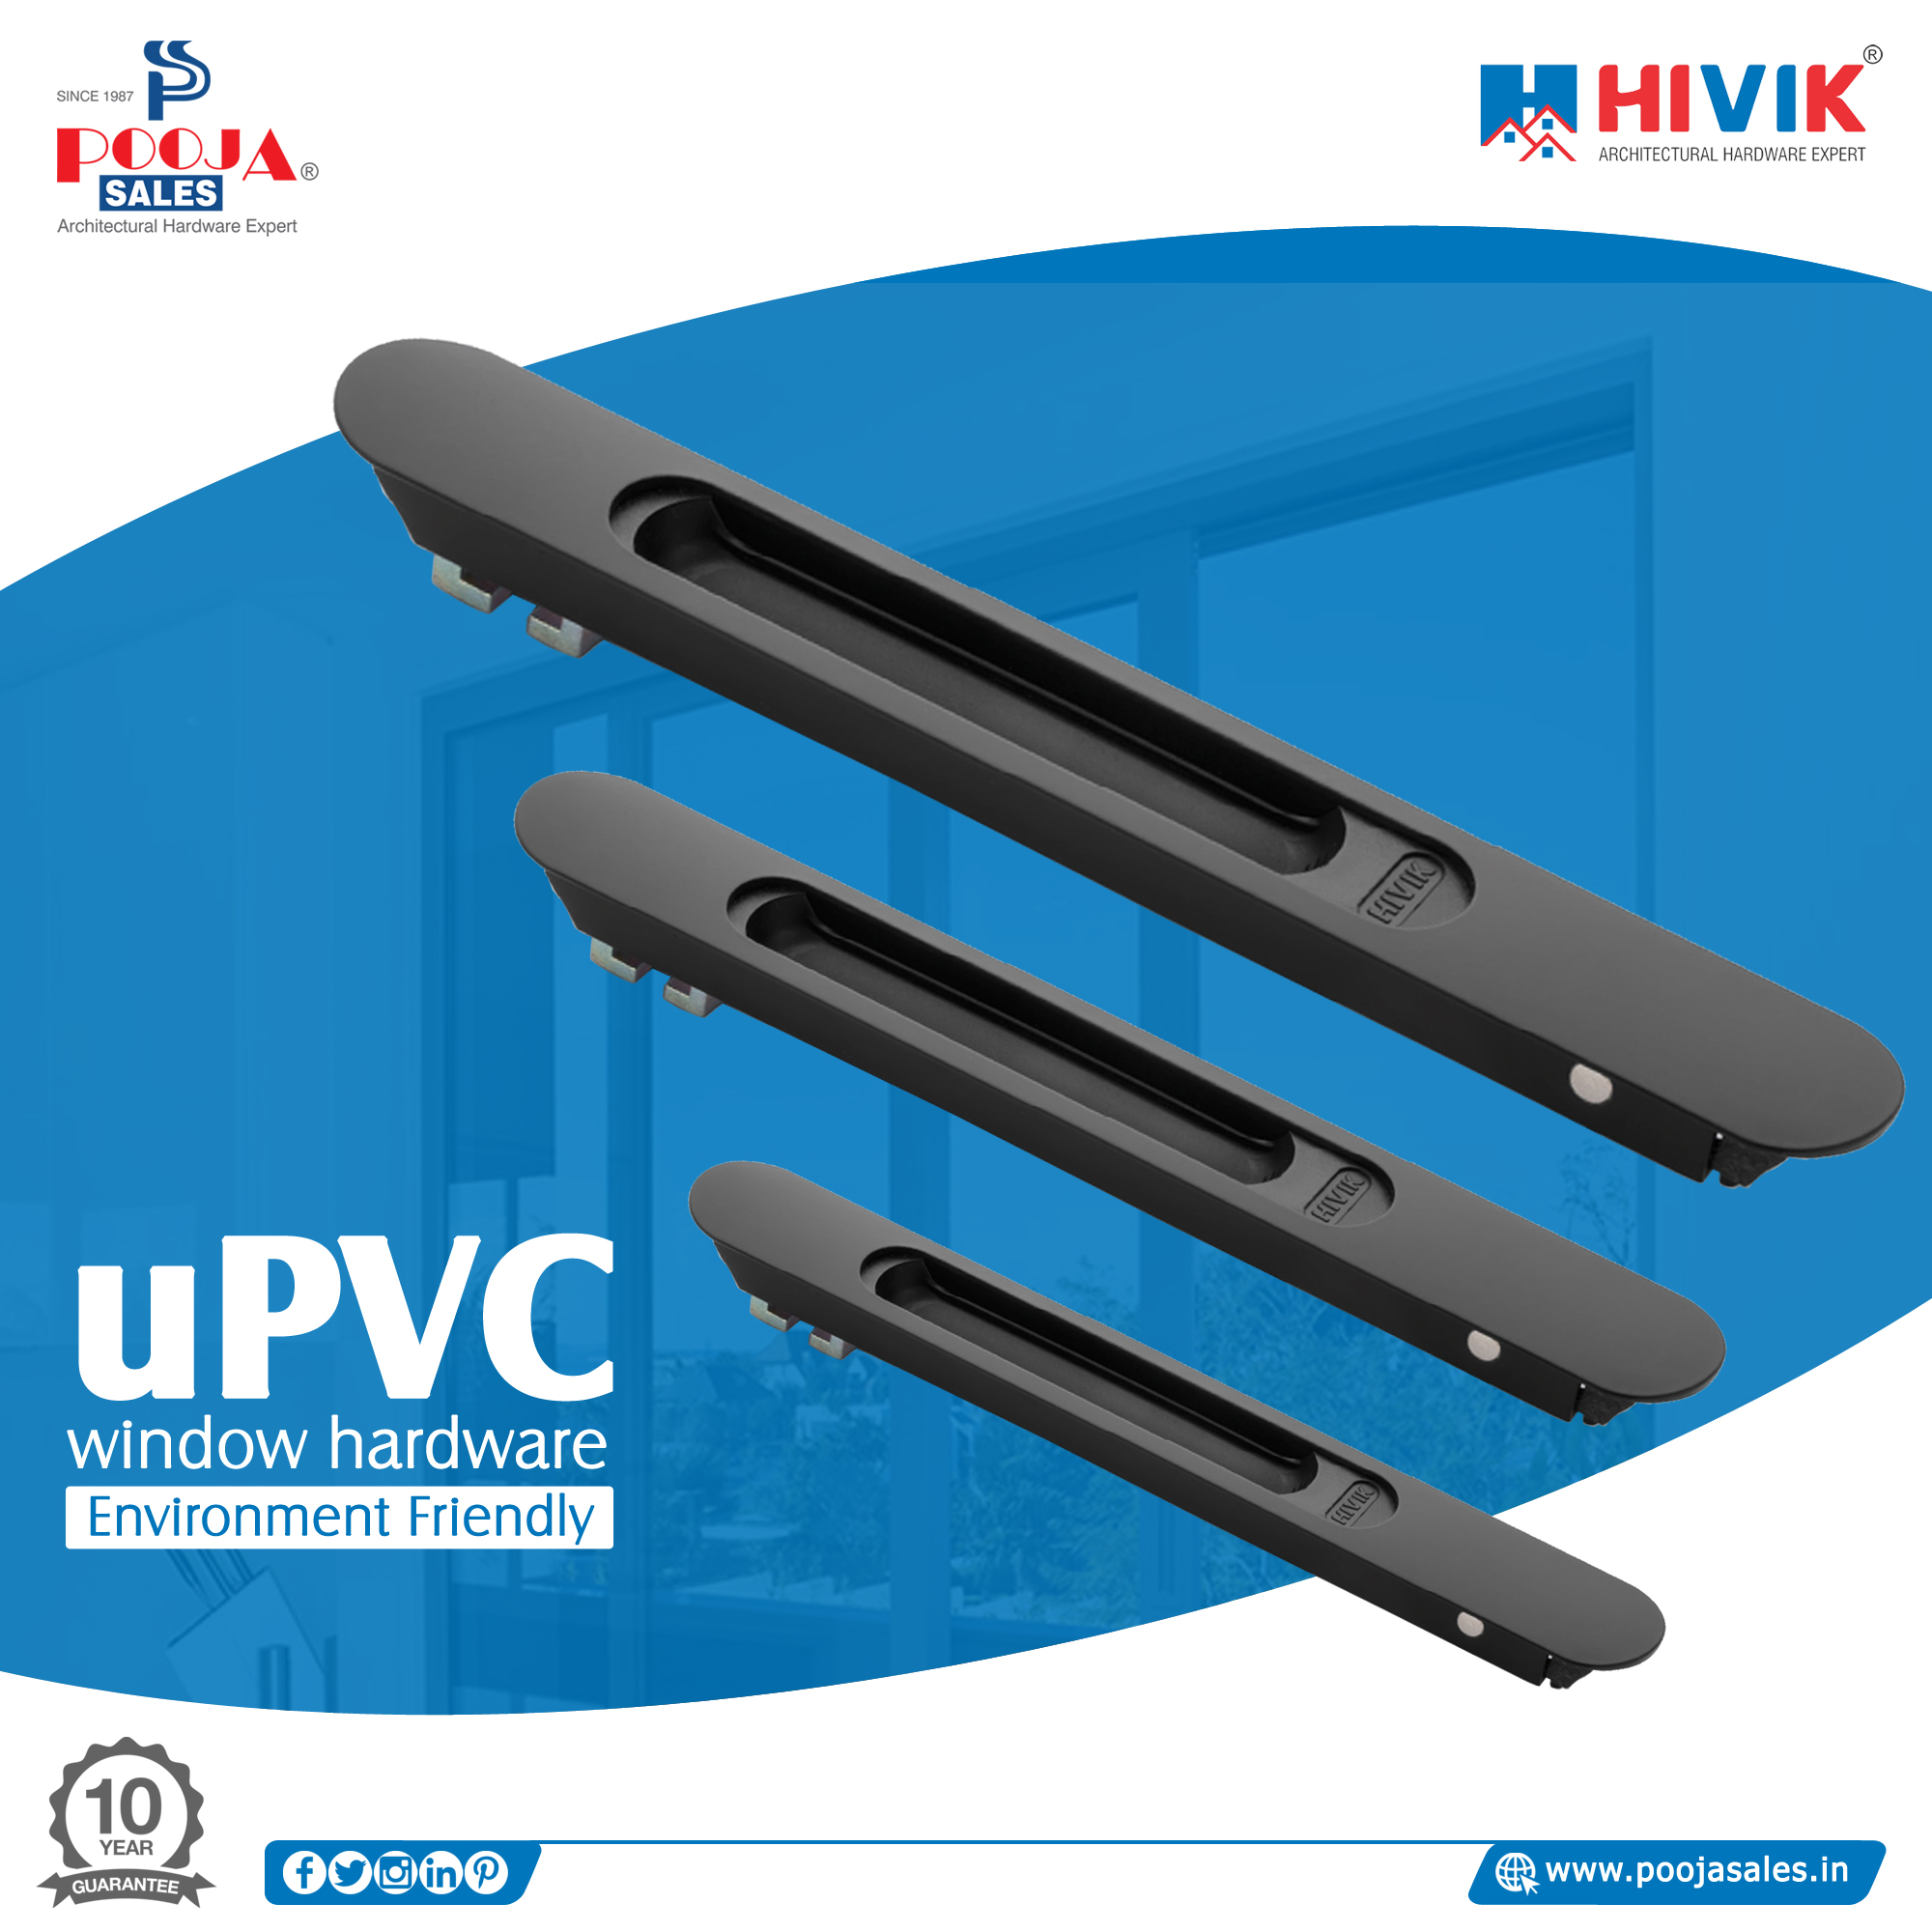 How to Save the Environment by Using uPVC Door and Window Hardware?